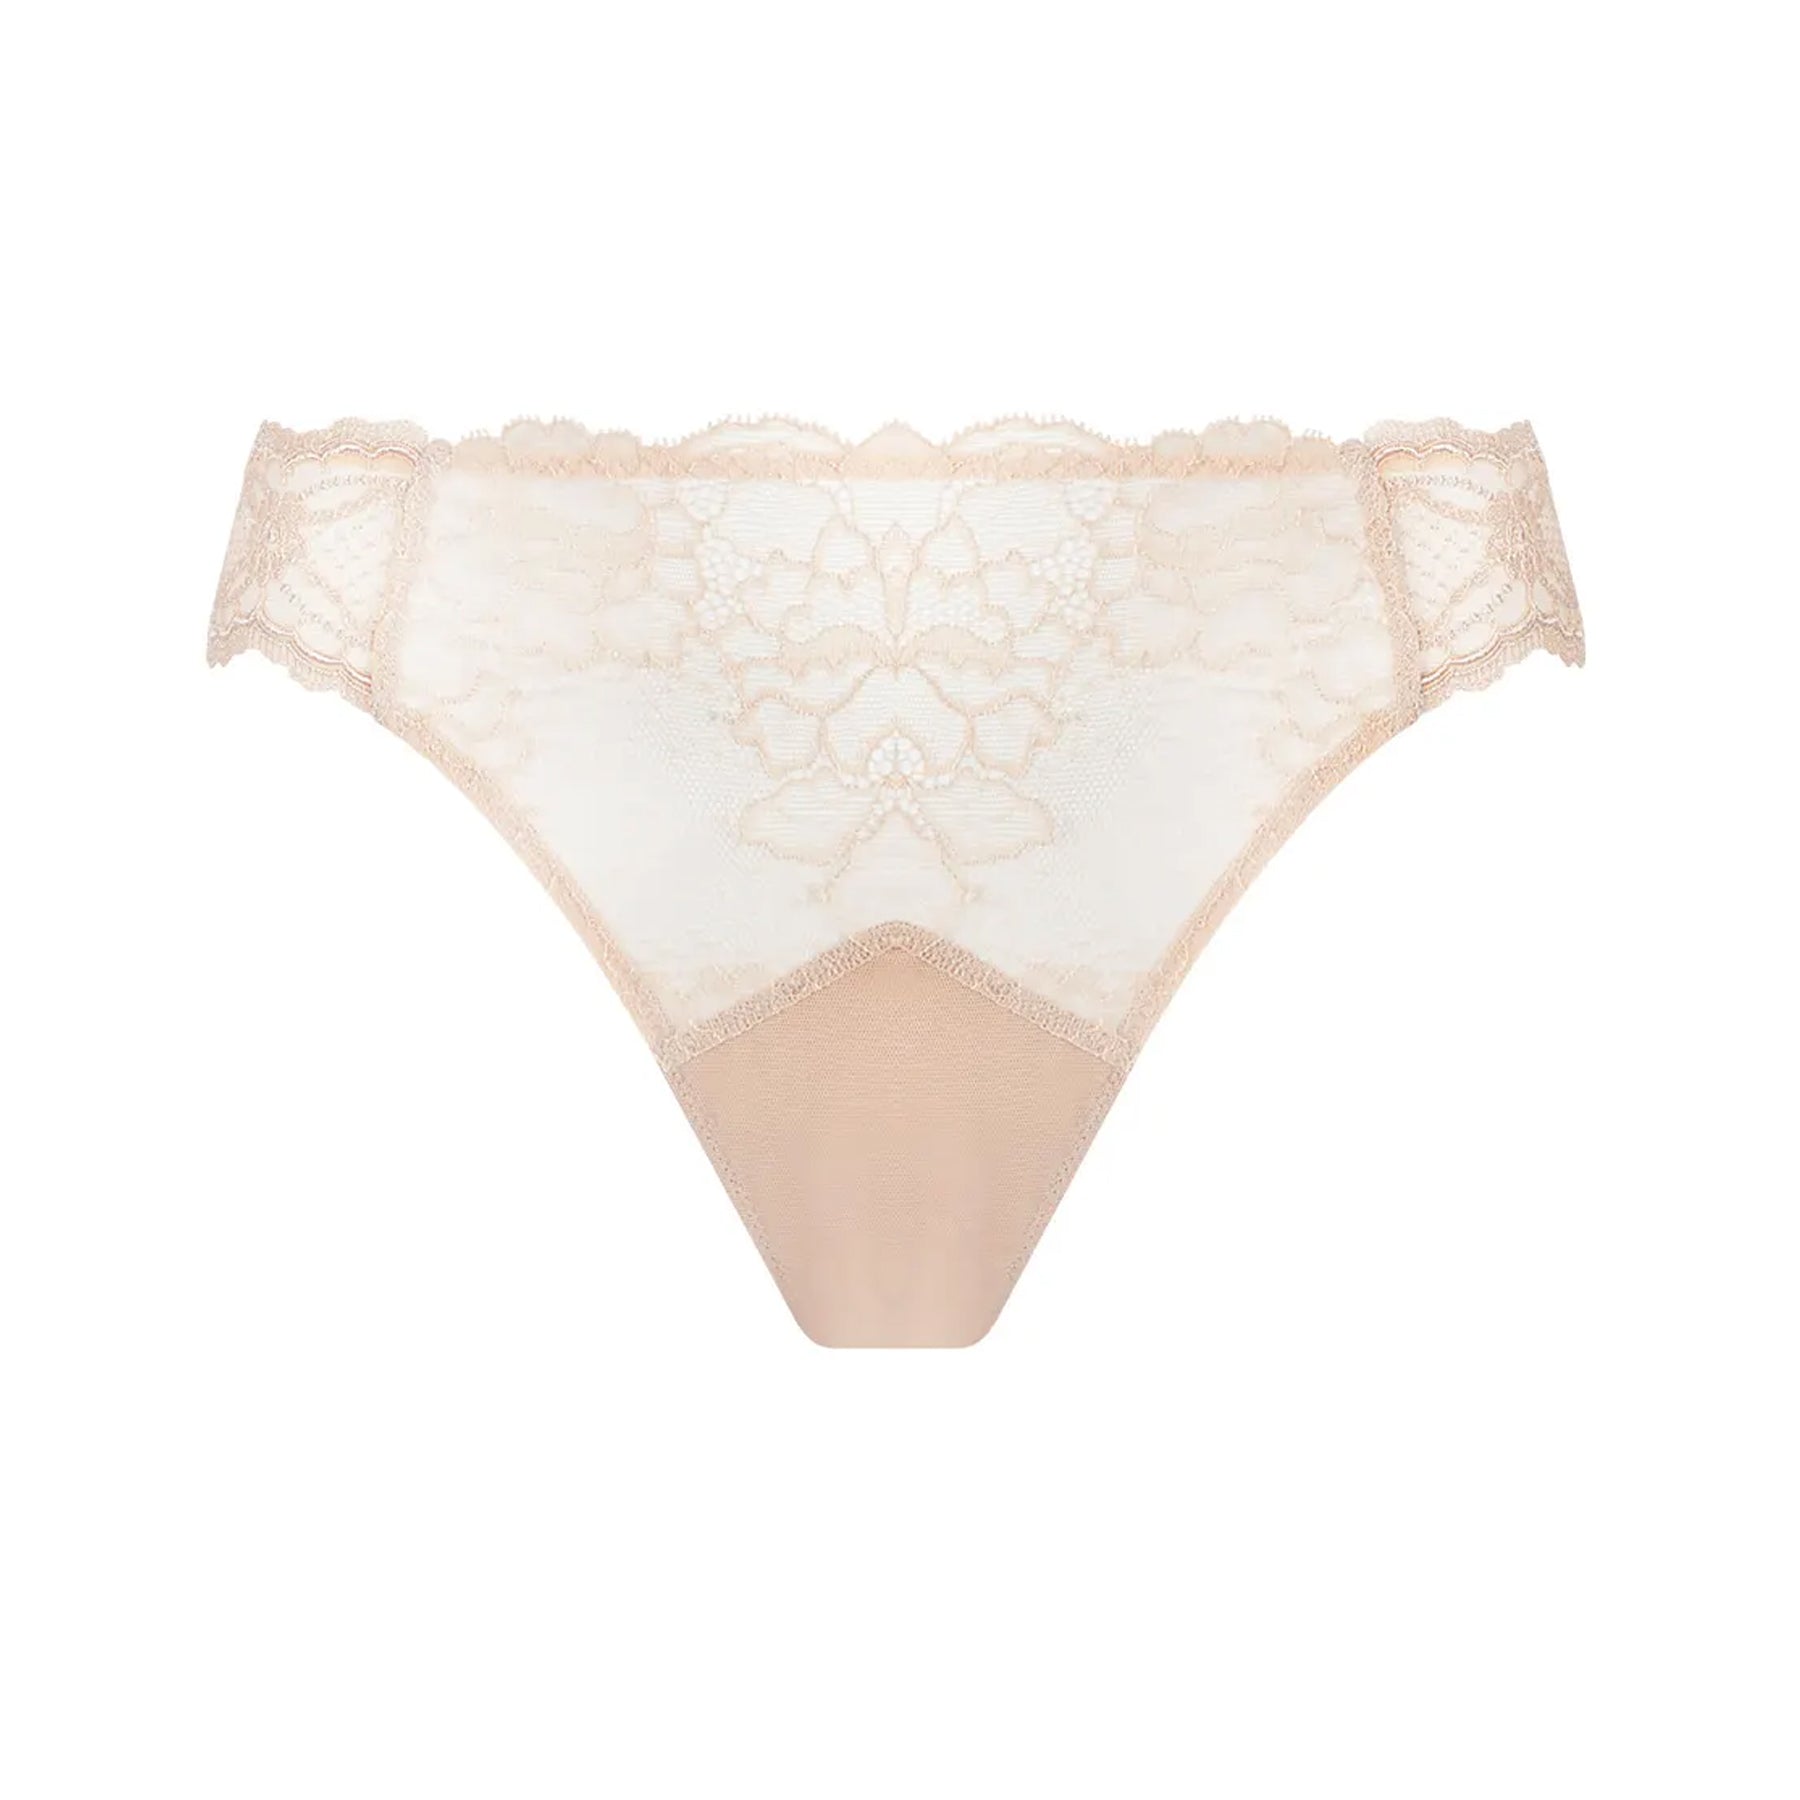 See-through Lingerie Set Bra and Panties in White Calais Lace